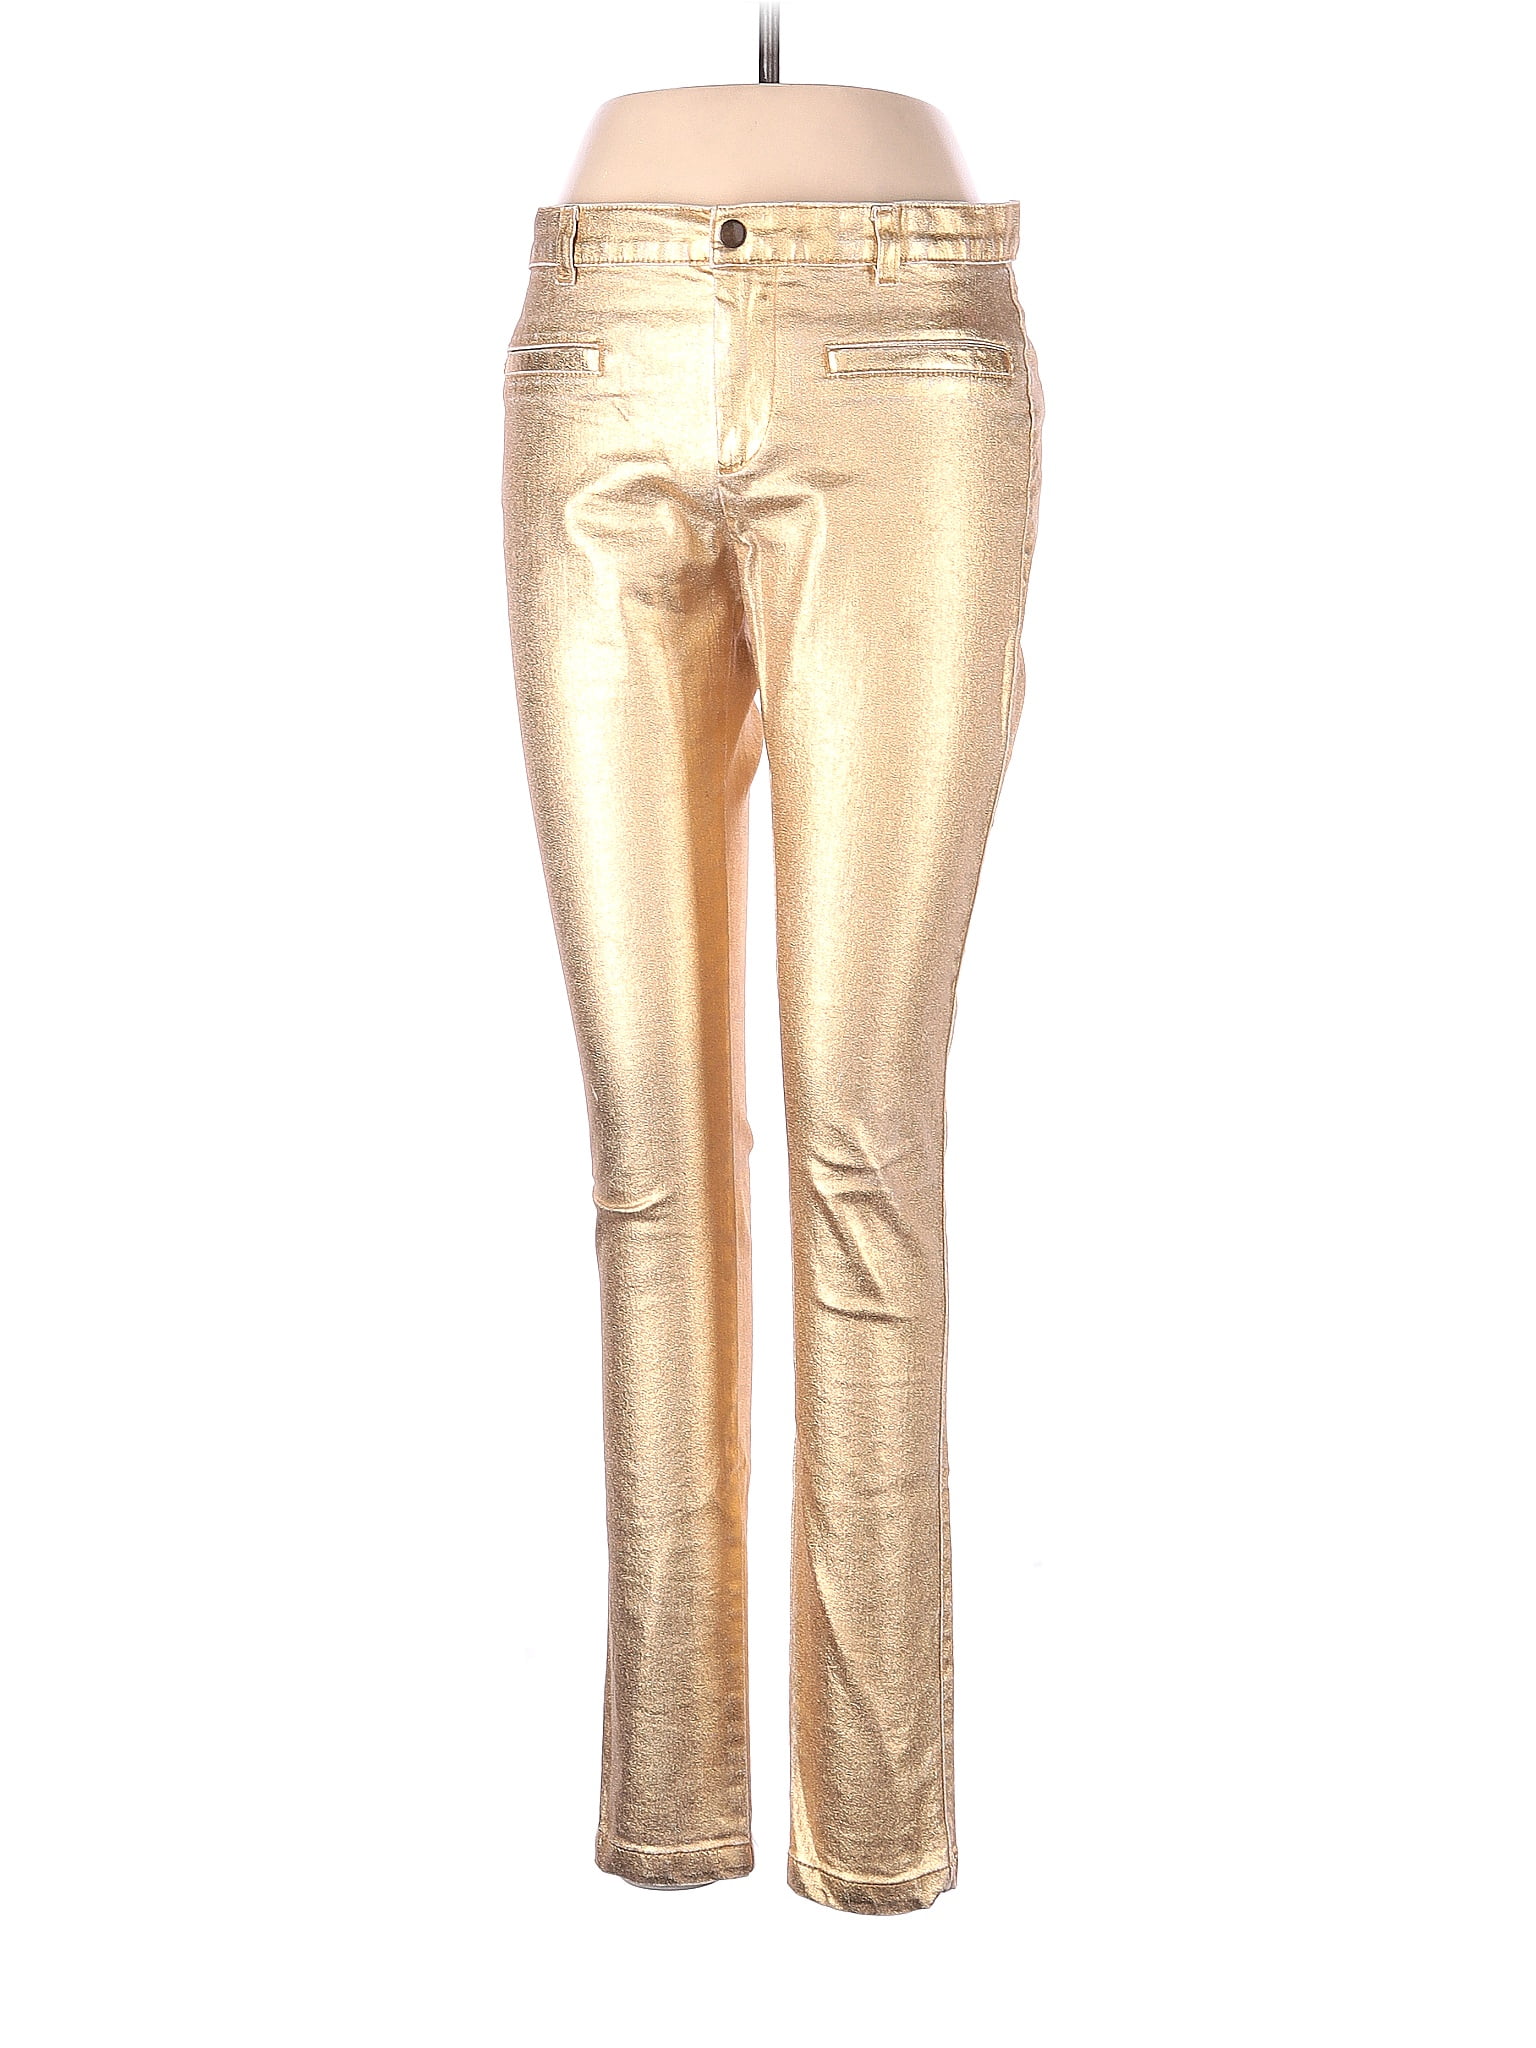 Trafaluc by Zara Solid Metallic Gold Jeggings Size M - 66% off